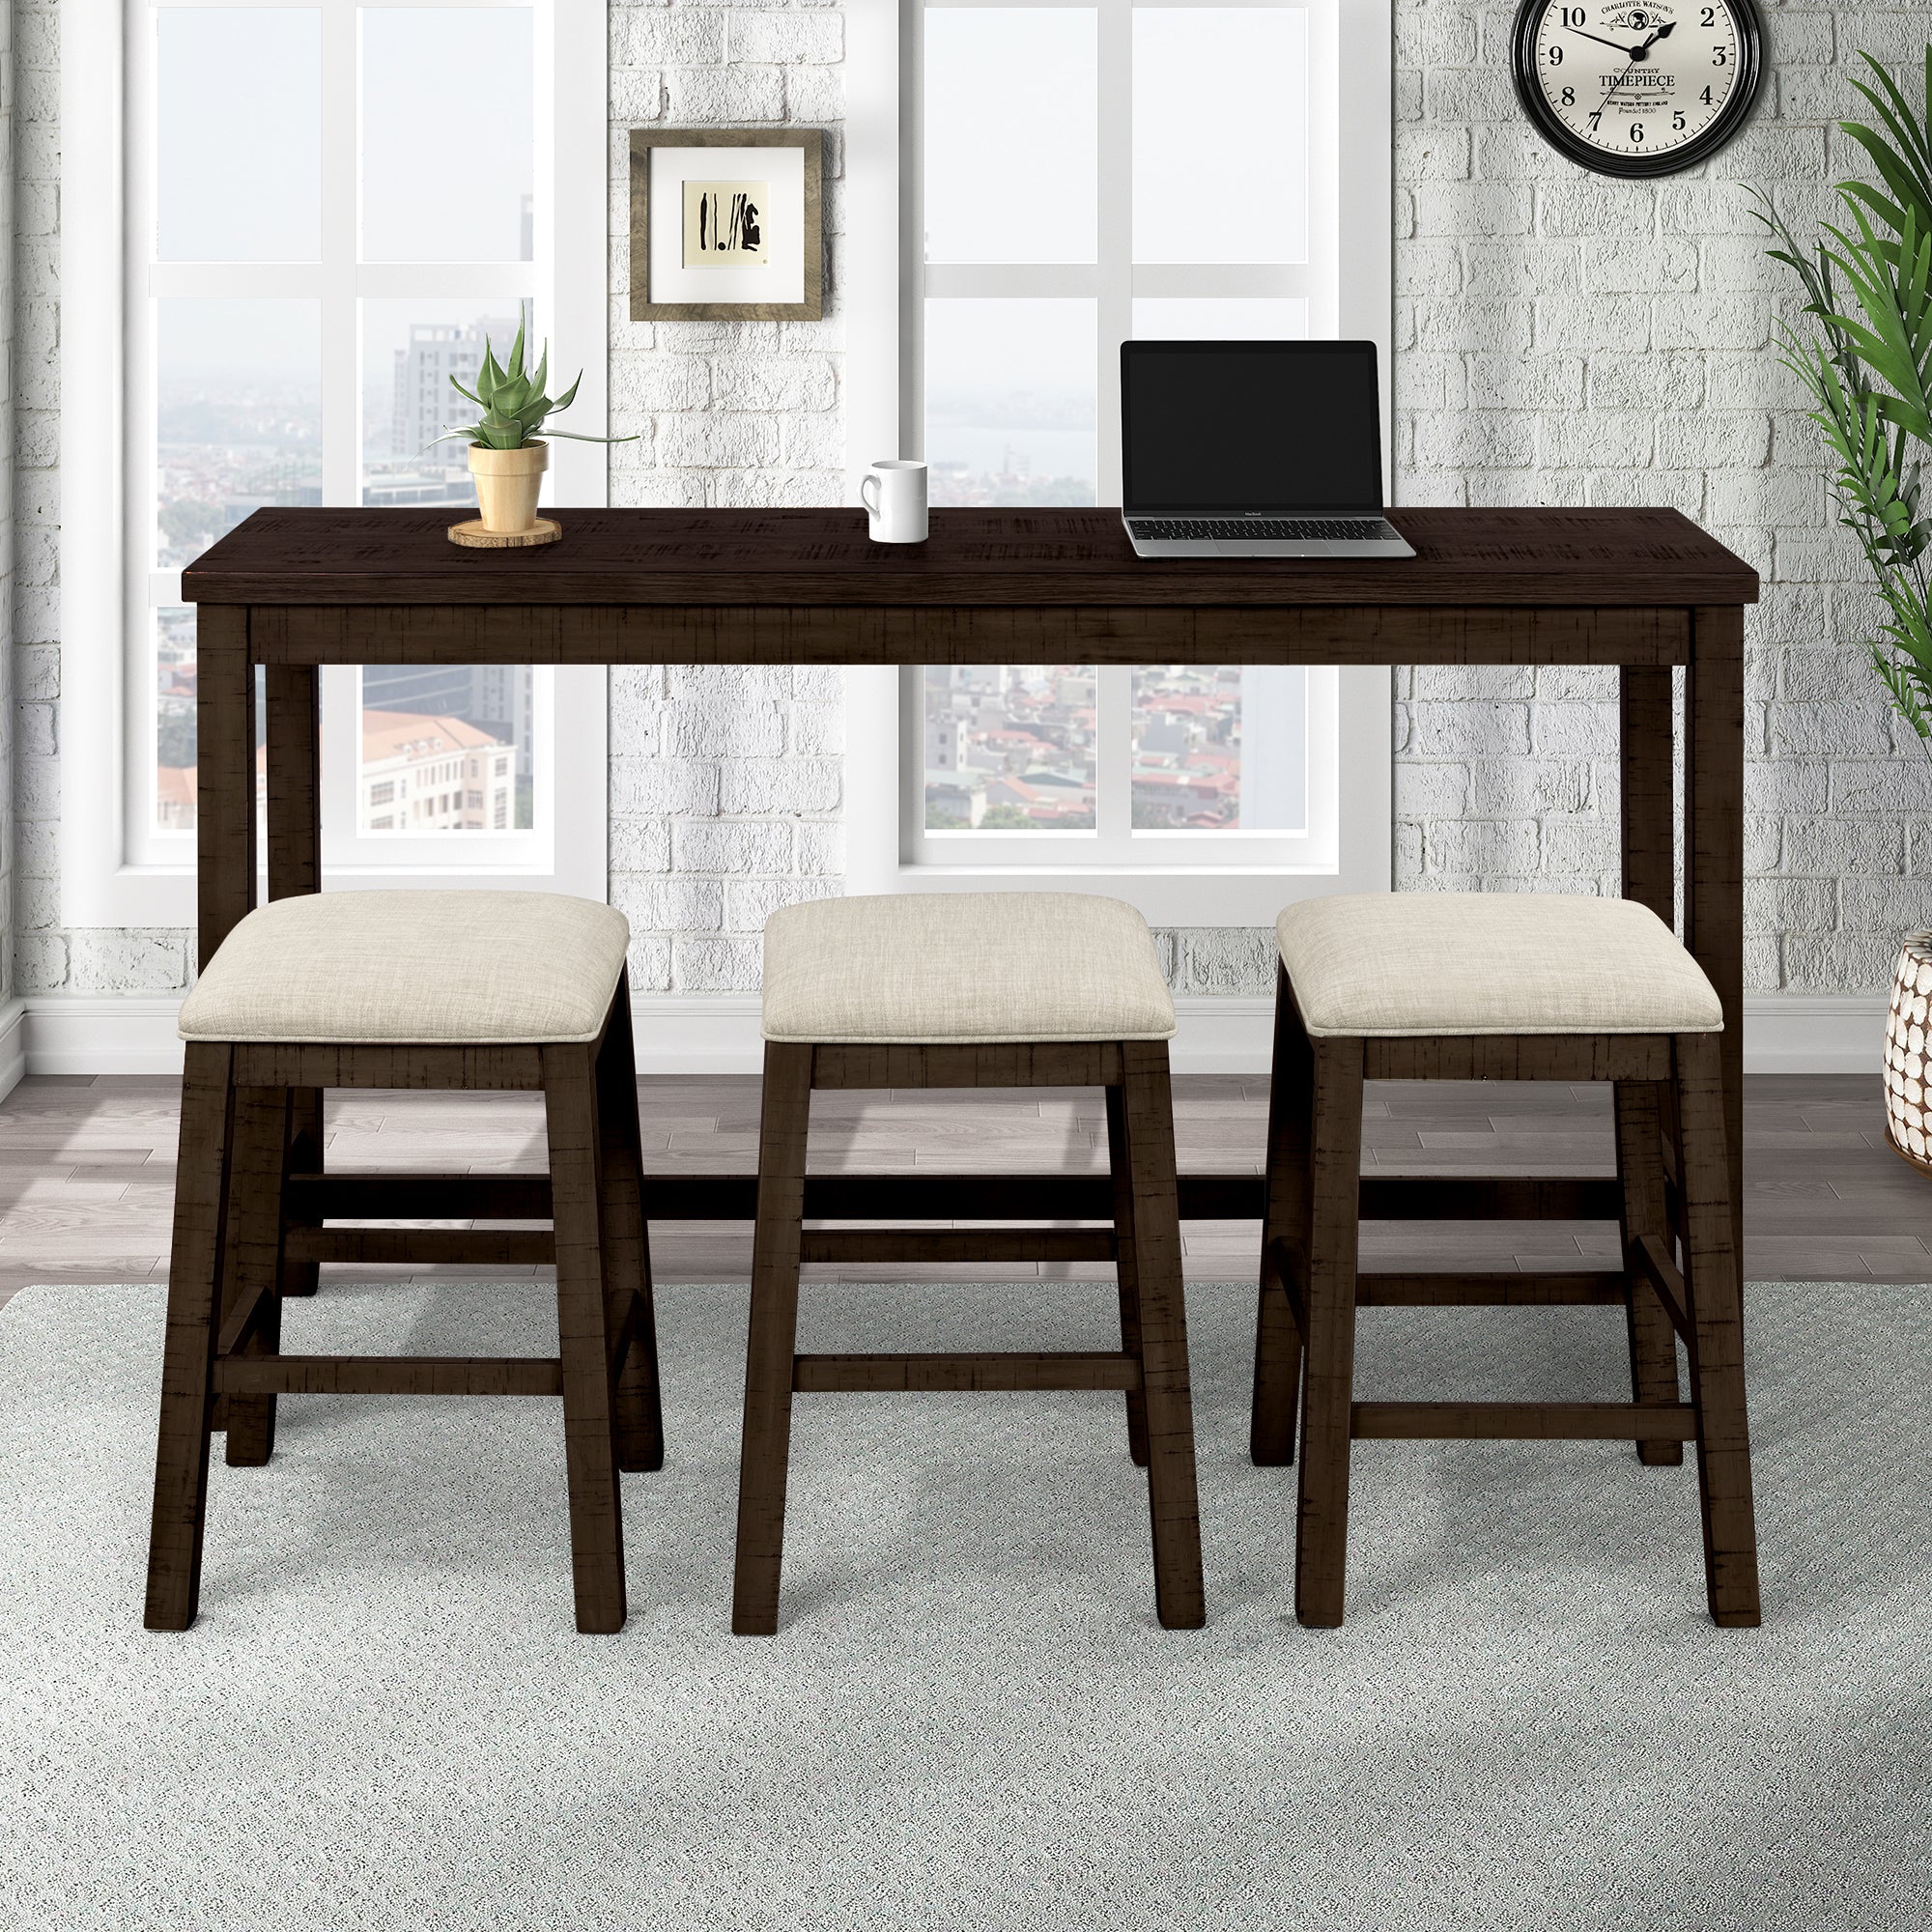 4 Pieces Counter Height Table with Fabric